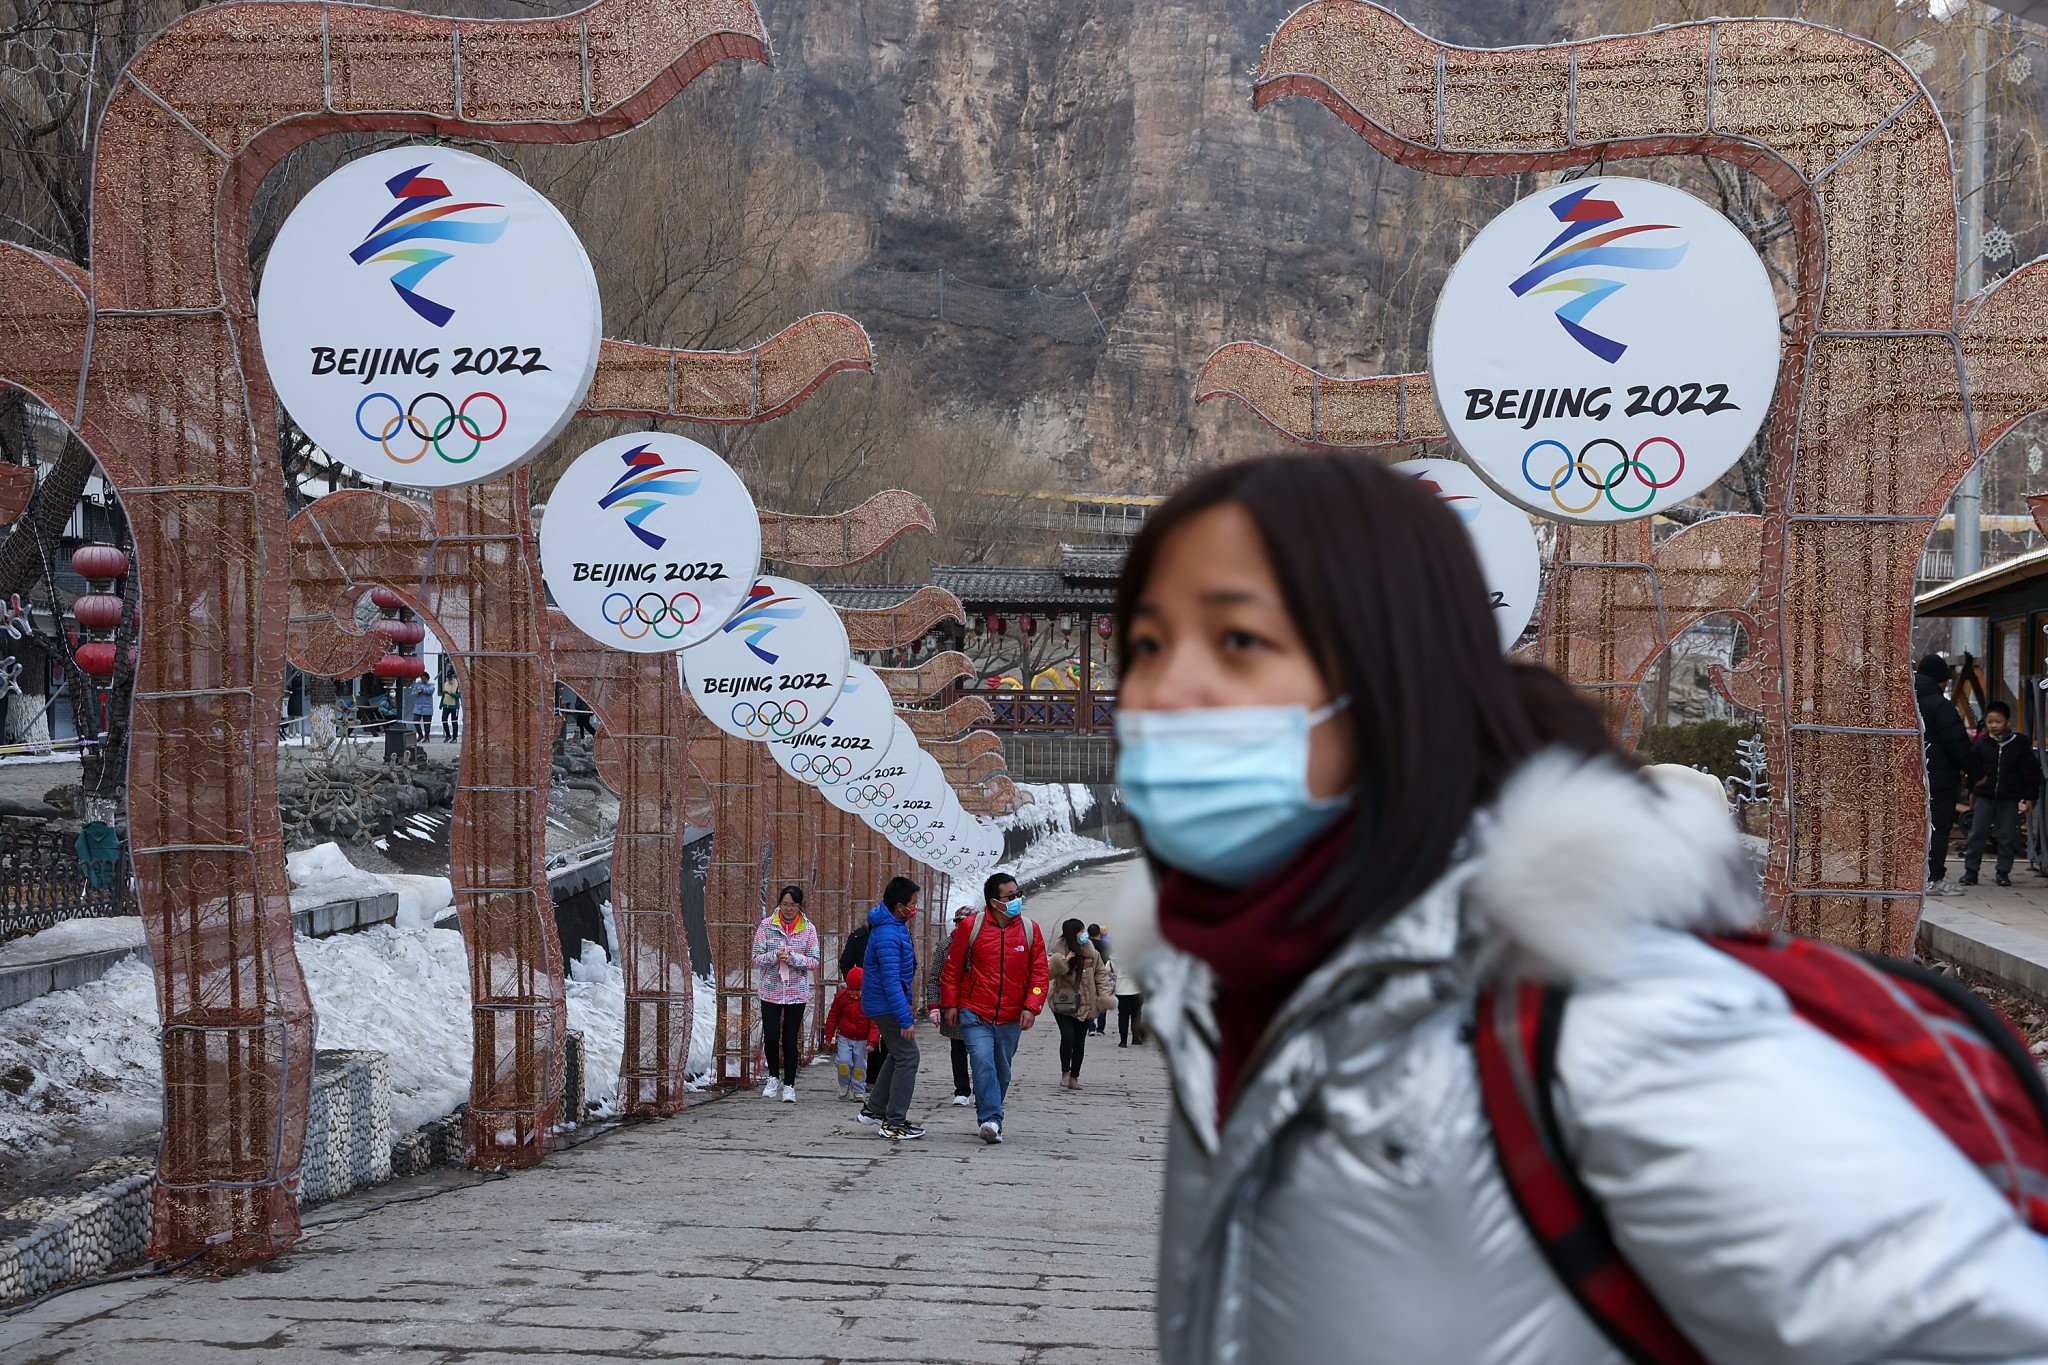 Beijing 2022 organisers insist the COVID-19 pandemic has not delayed their preparations ©Getty Images